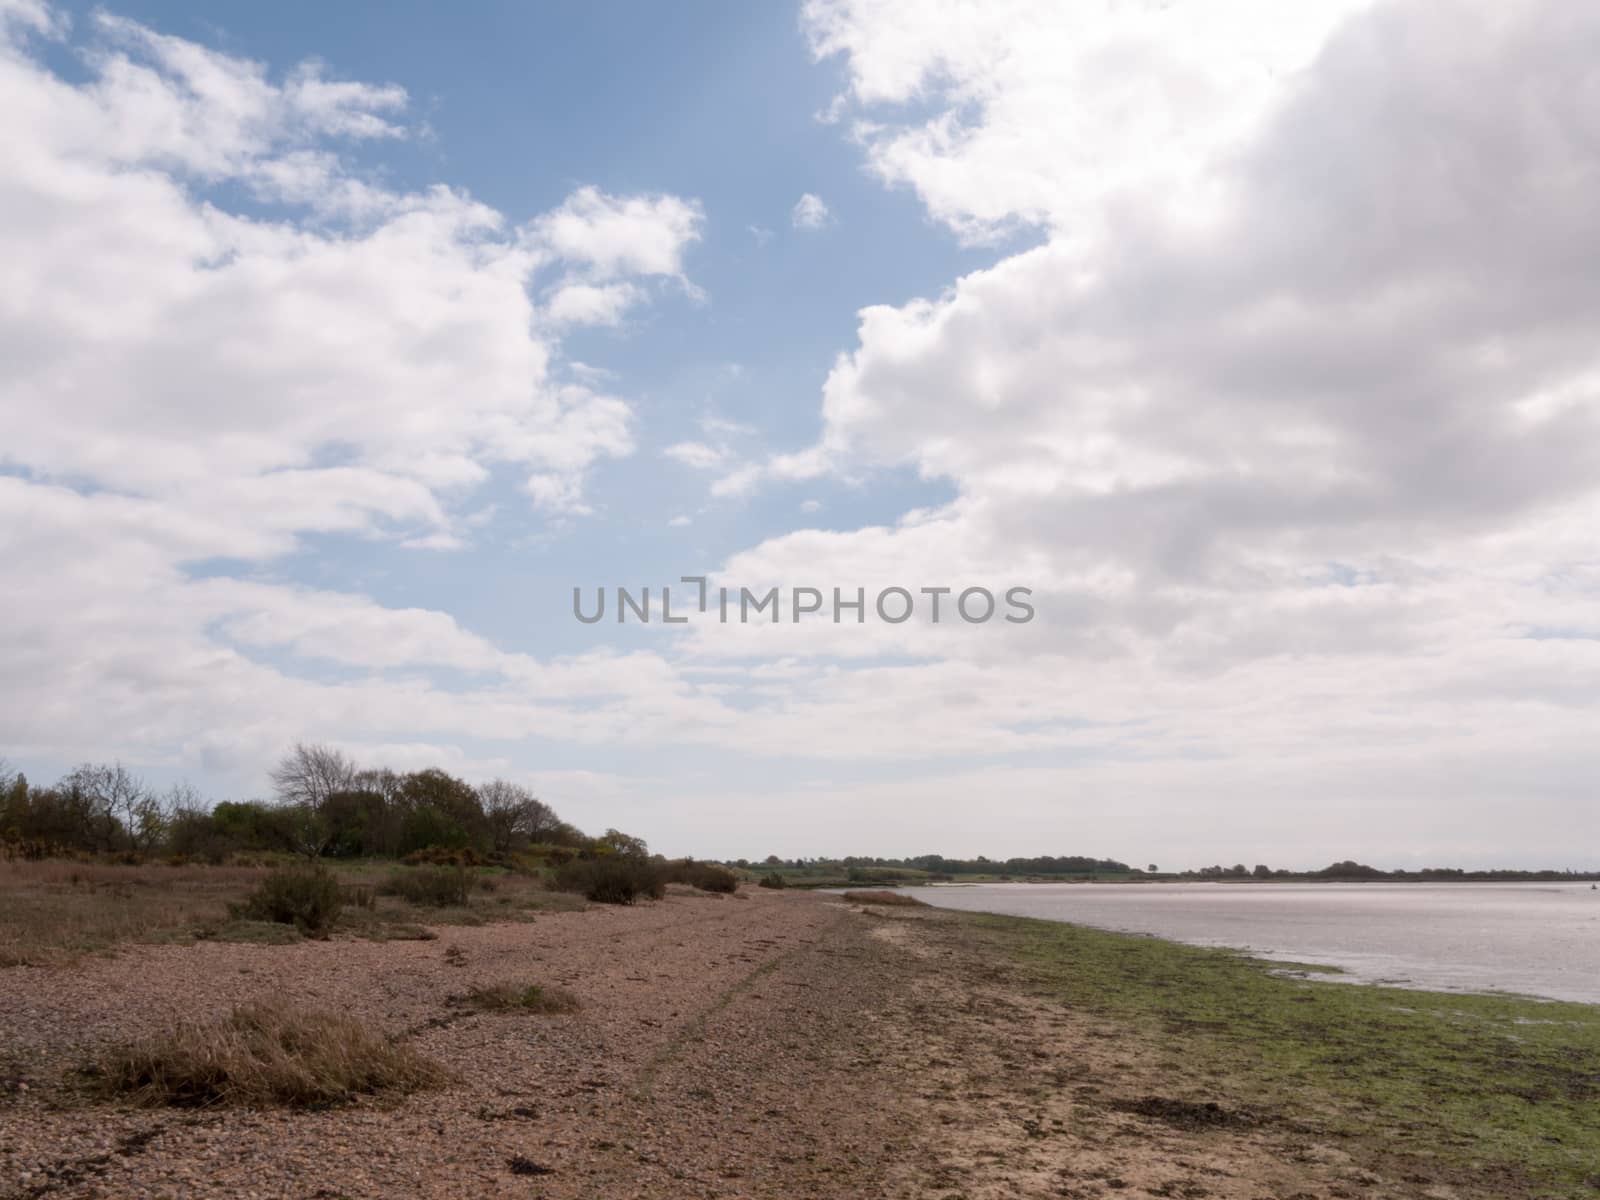 a landscape shot of the beach and sea with a cloudy blue sky and by callumrc